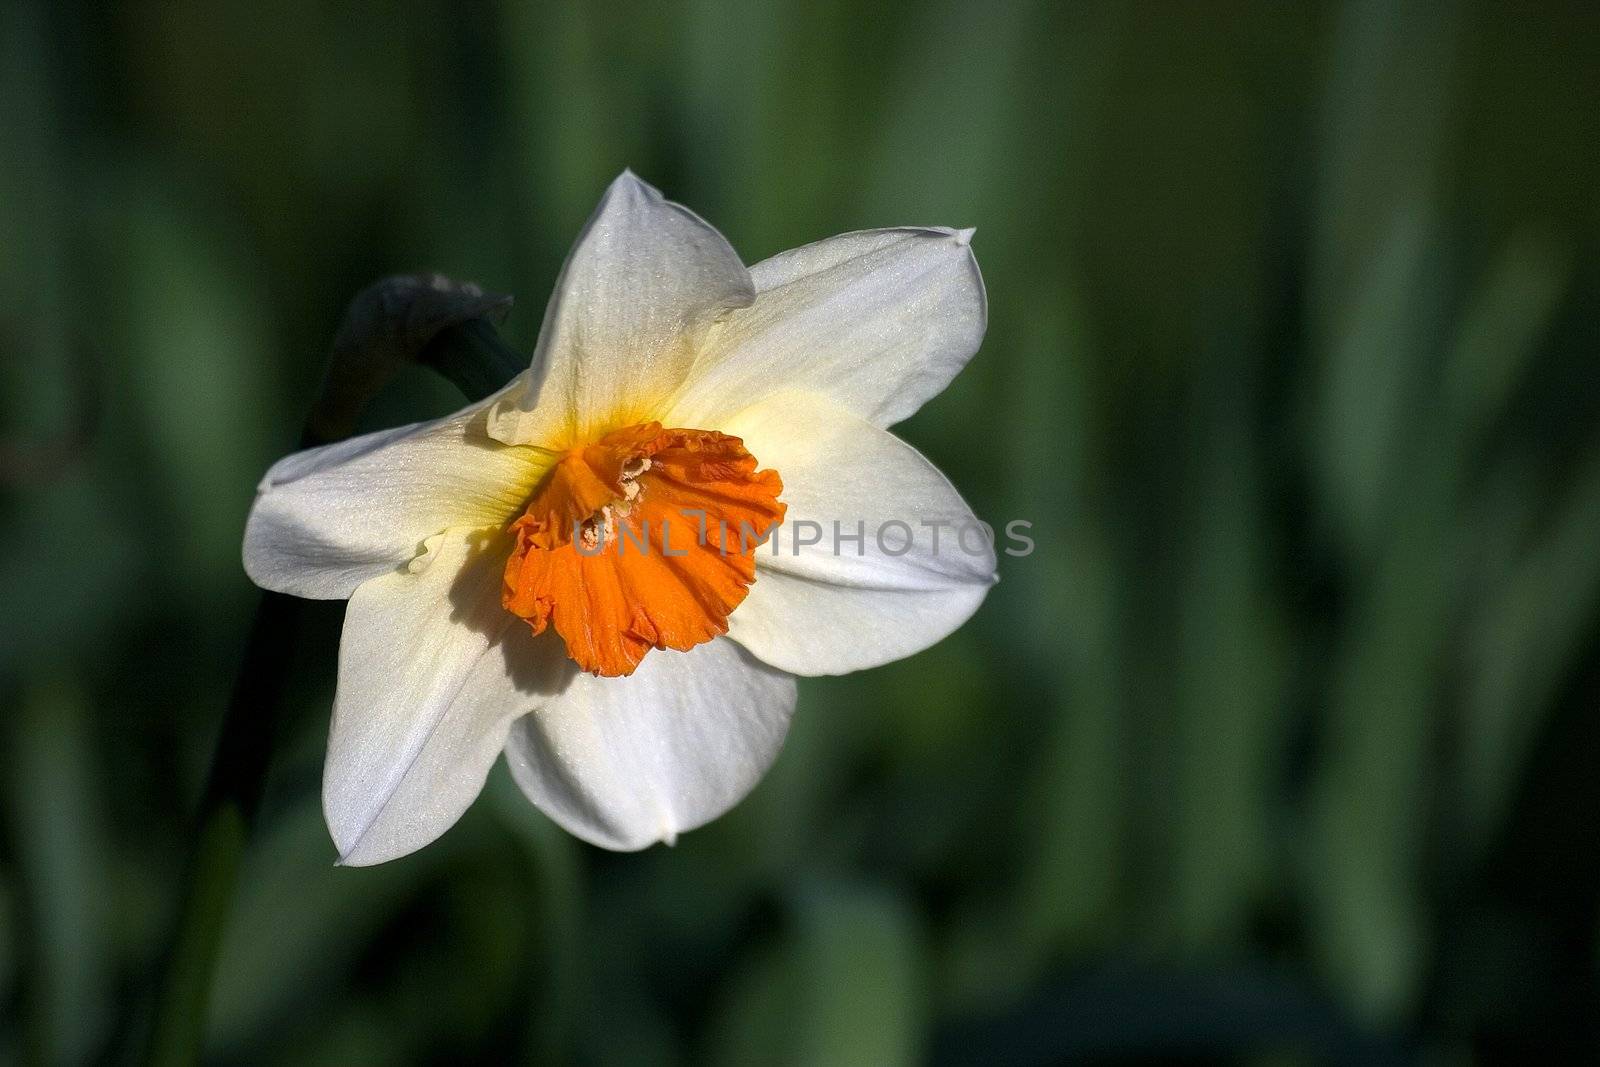 Narcissus nicely blurred background